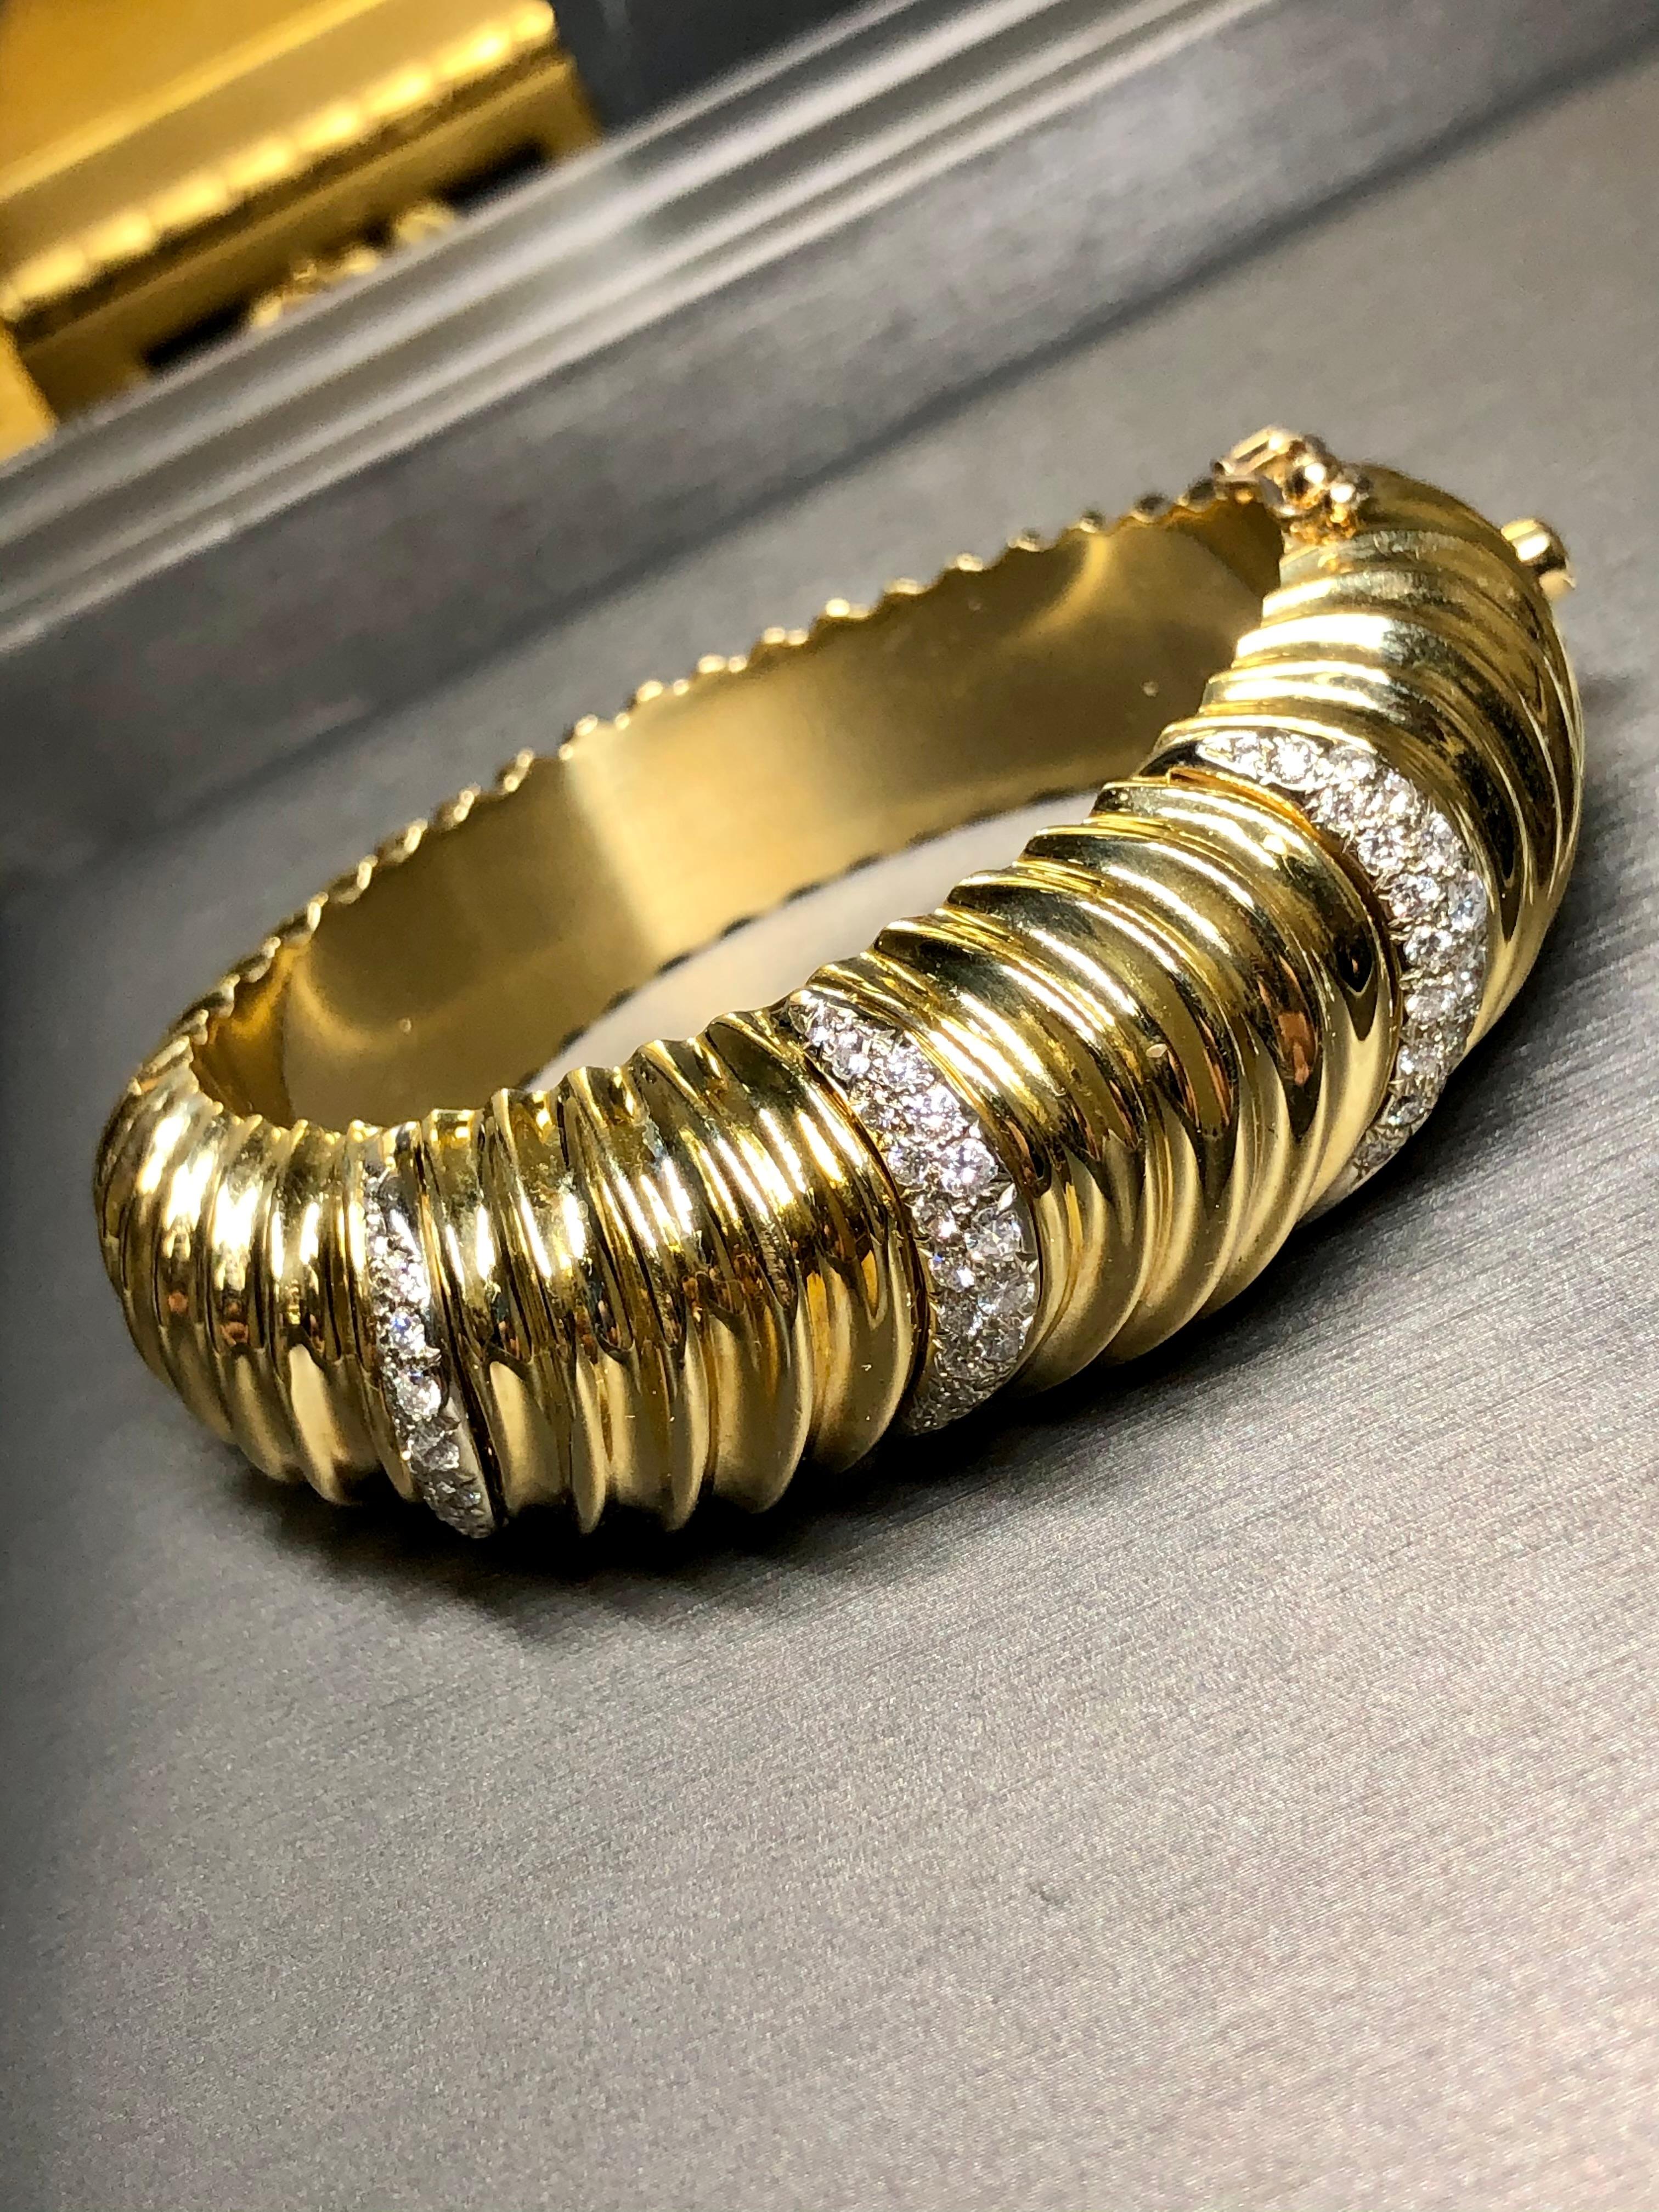 A fabulous Ruth Satsky cuff done in supple 18K yellow gold in a graduating ridged or scalloped design and bead set with approximately 2cttw in G-I color Vs1-2 clarity round diamonds. Has a very secure box clasp with additional safety. It’s such a